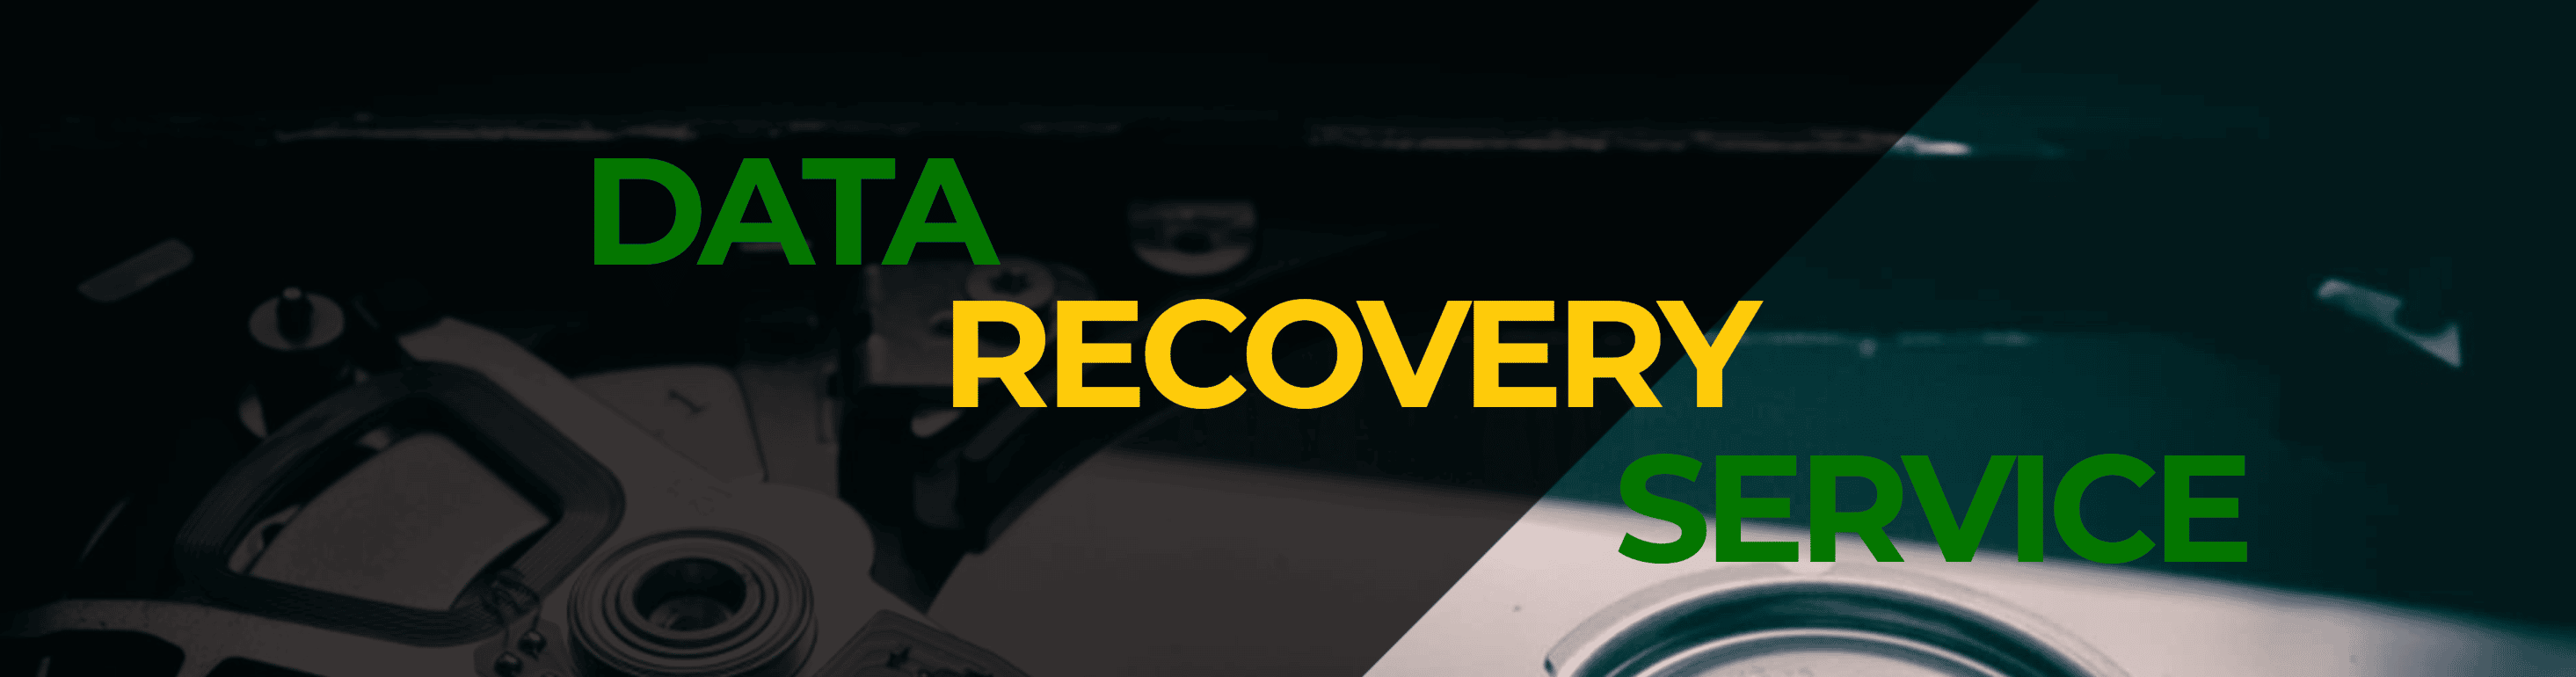 SERVER DATA RECOVERY